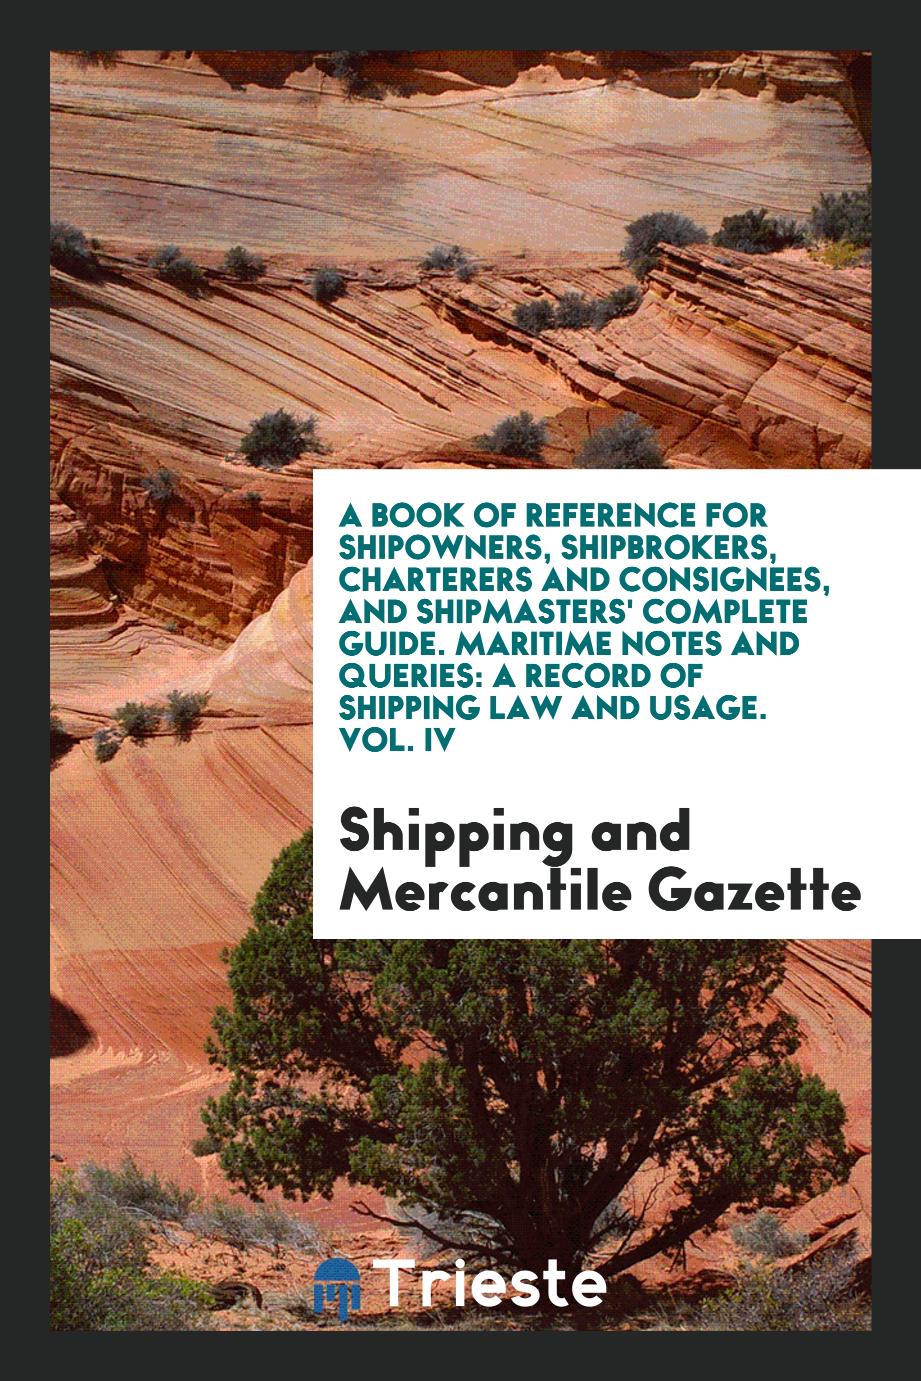 A Book of Reference for Shipowners, Shipbrokers, Charterers and Consignees, and Shipmasters' Complete Guide. Maritime Notes and Queries: A Record of Shipping Law and Usage. Vol. IV